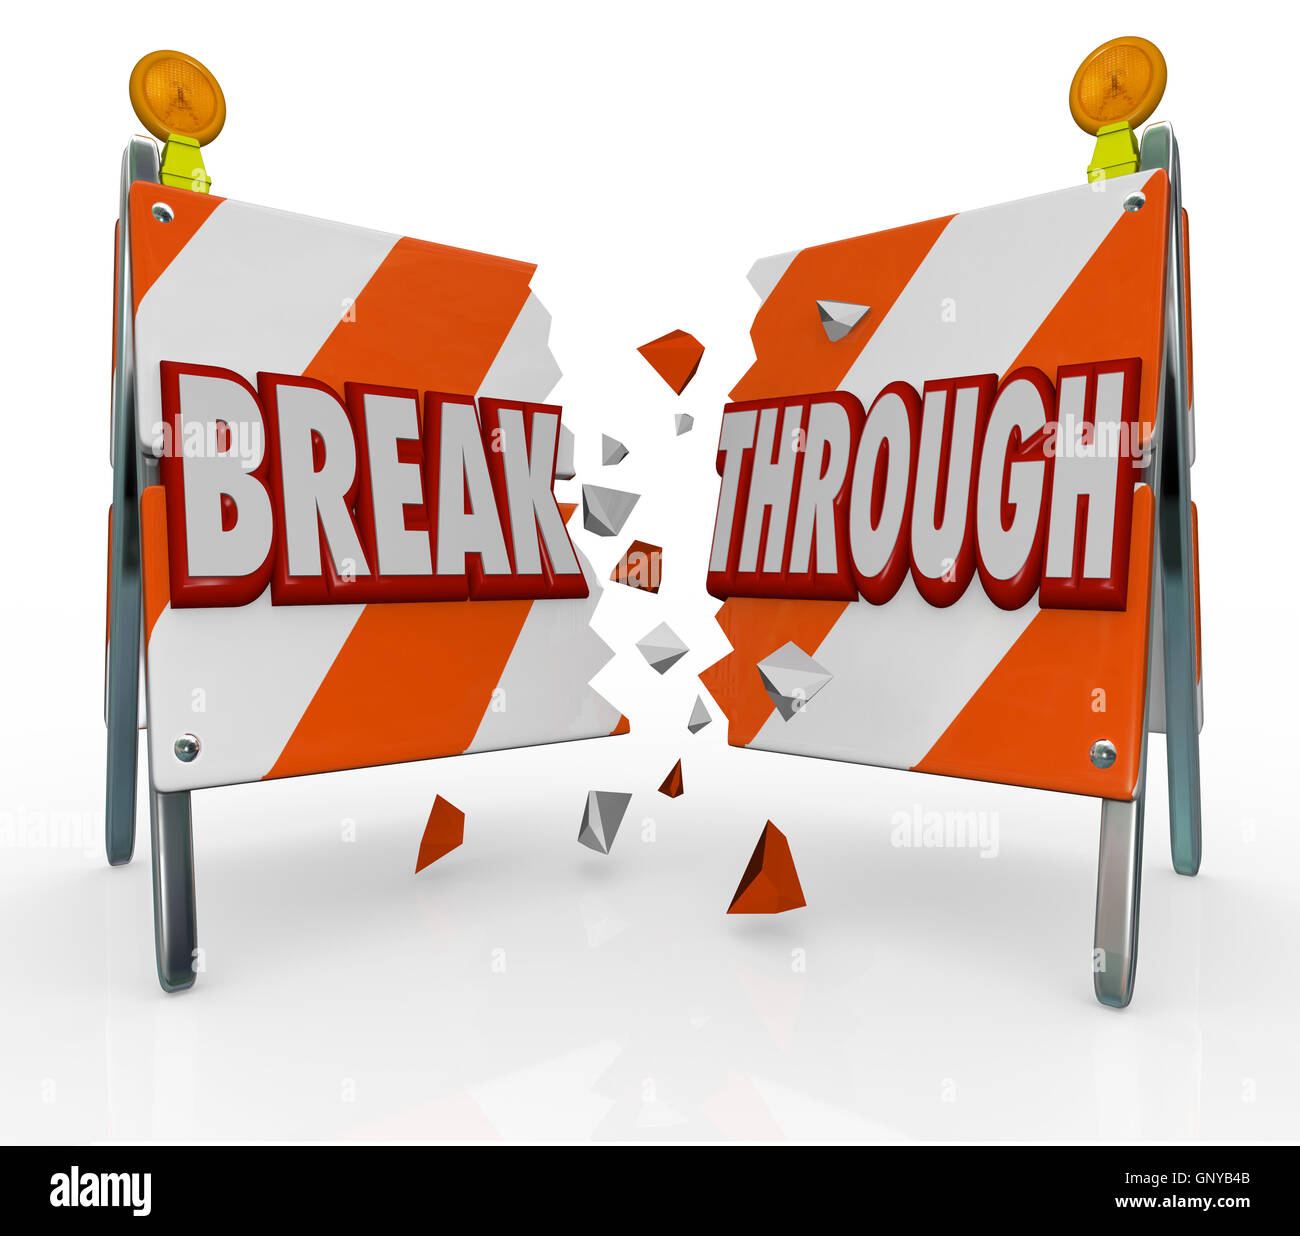 Break Through Overcome Barrier Obstacle in Your Way Stock Photo